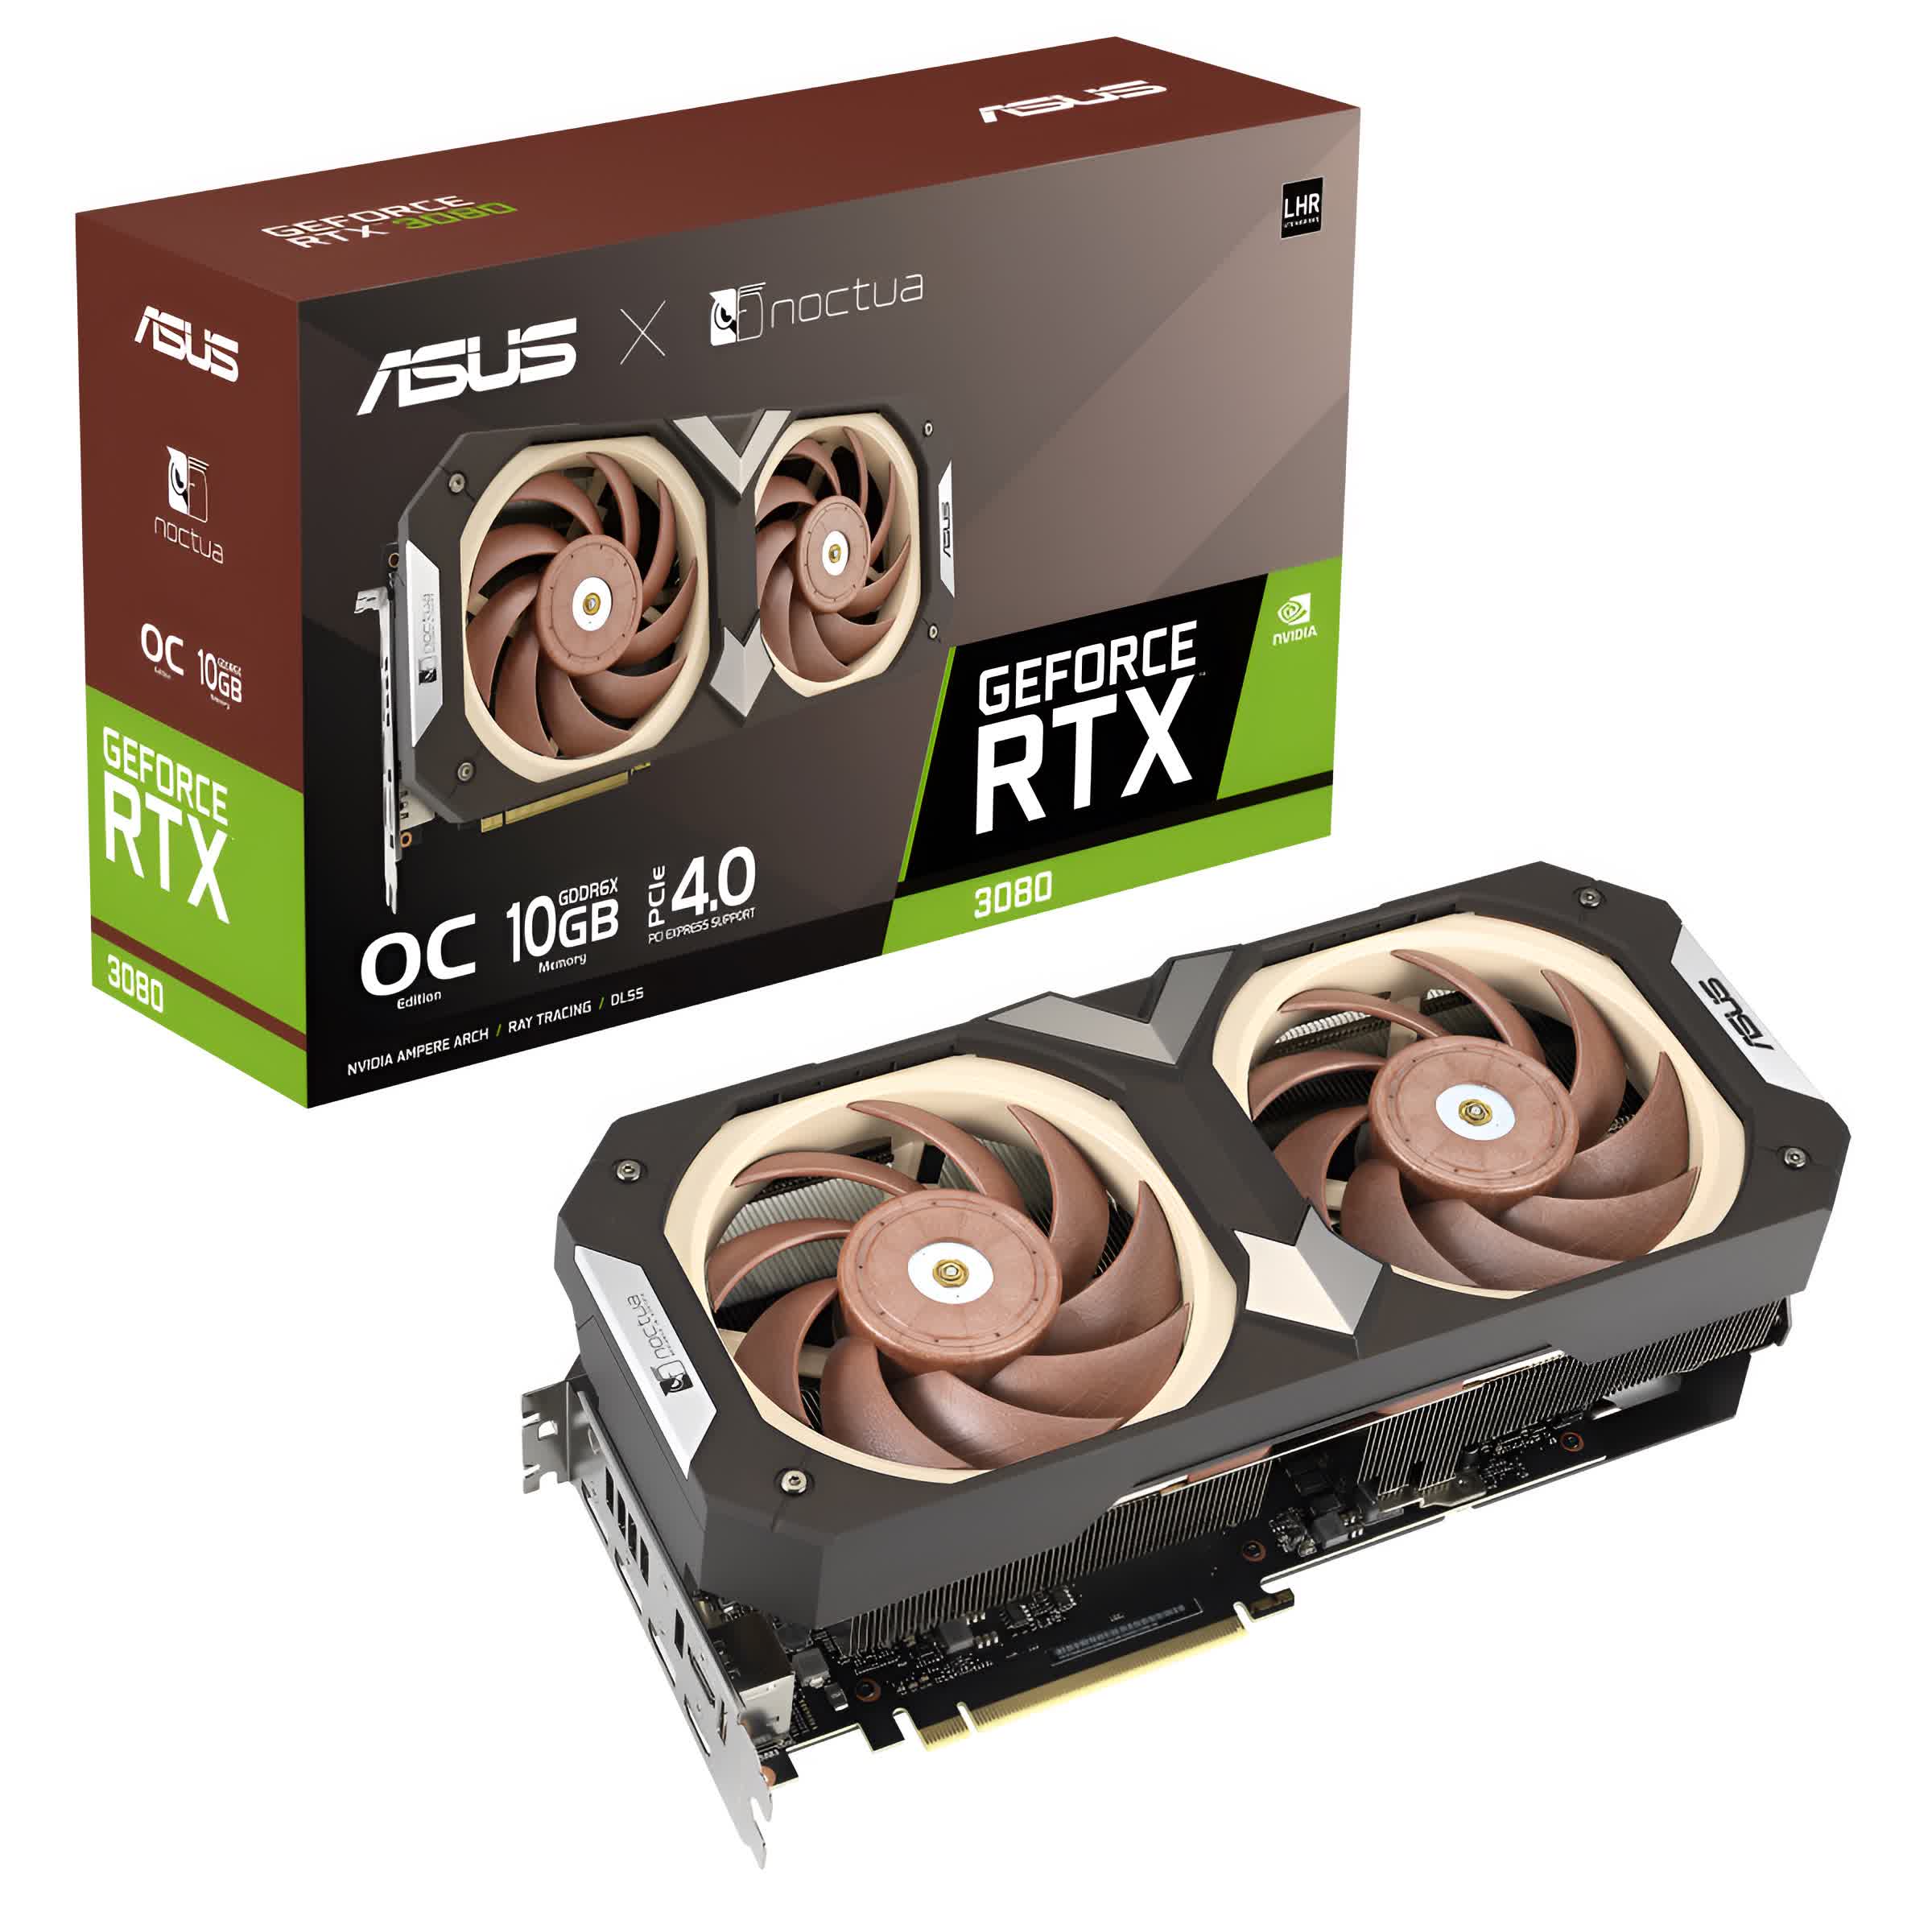 Noctua-equipped Asus GeForce RTX 3080 graphics card is official